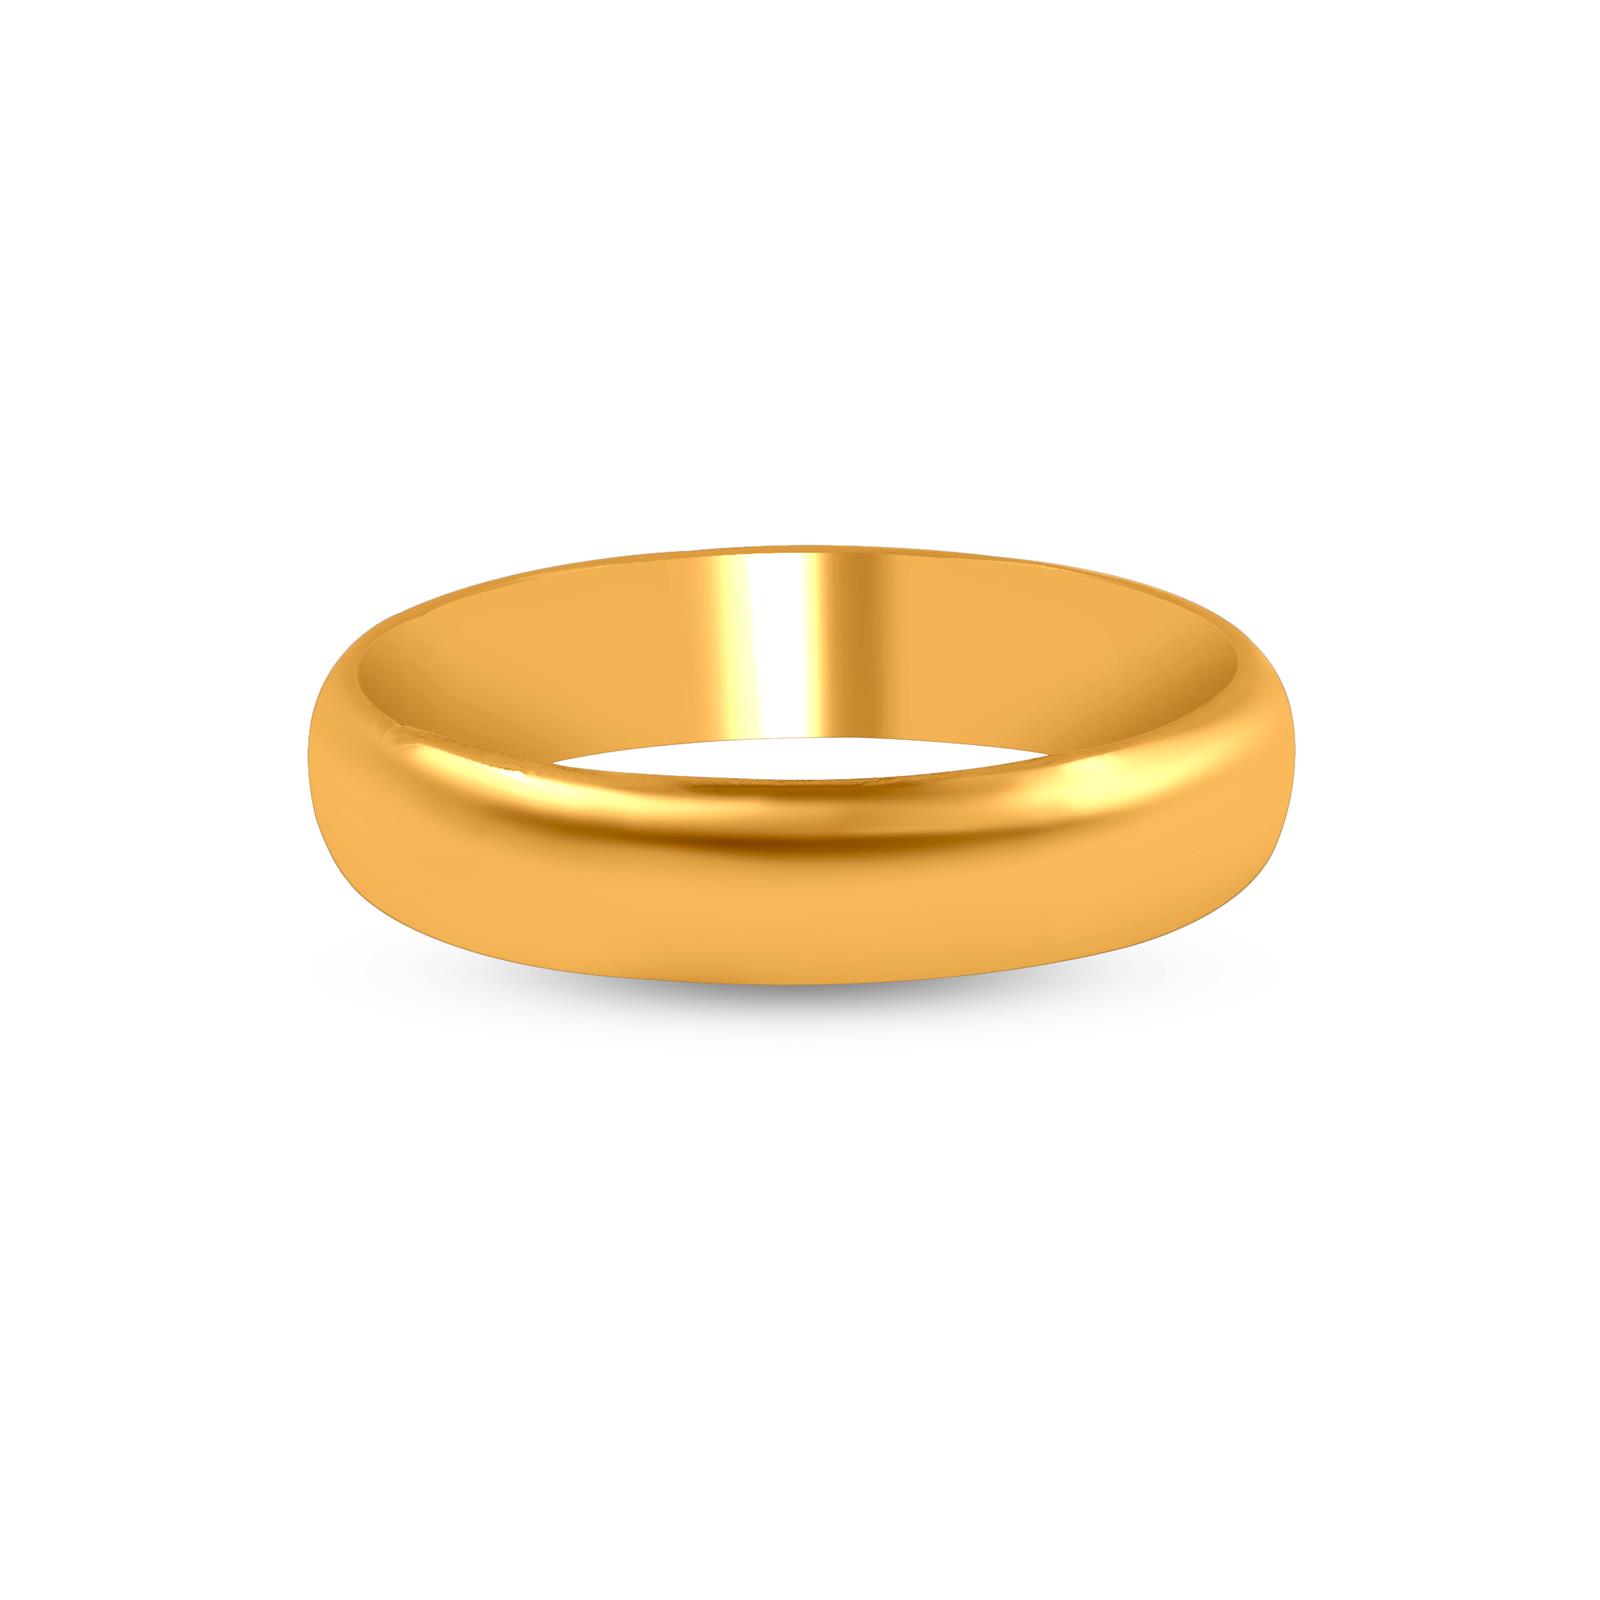 Gold fancy twins Ring 22k purity weight-8.200gm Approx, 2 pic set ring  (genuine size) – Asdelo